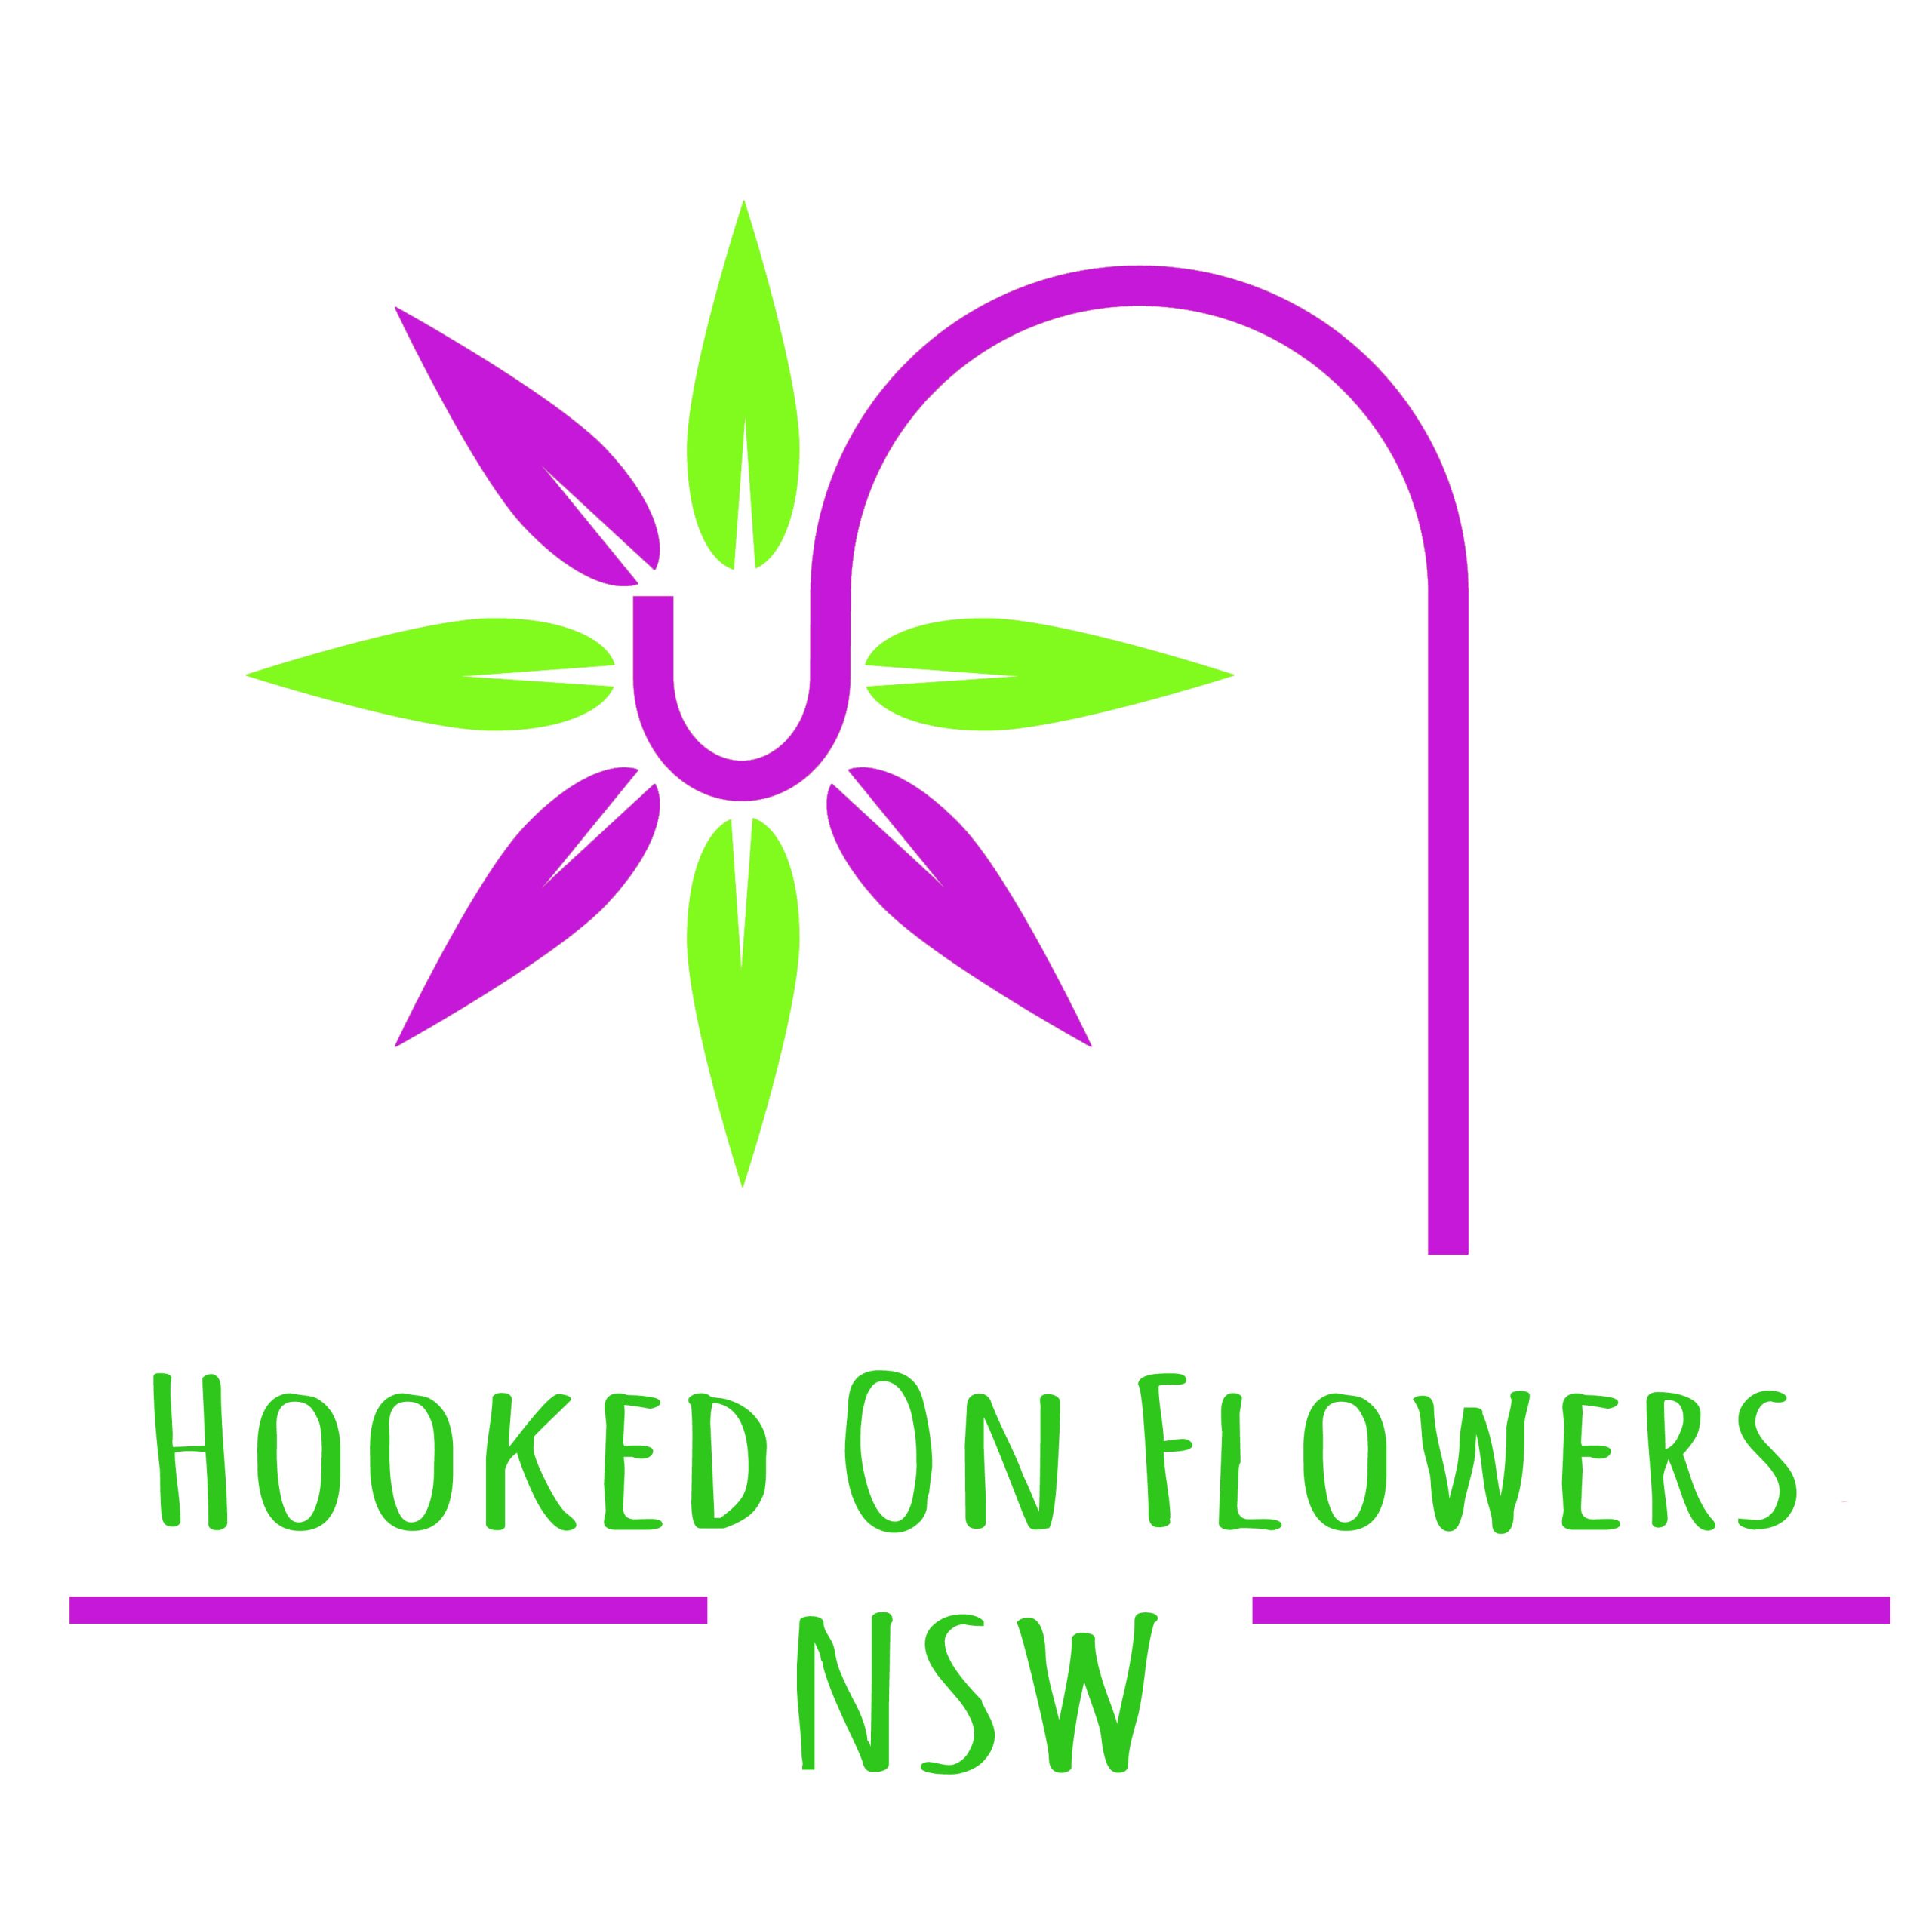 Hooked on Flowers NSW